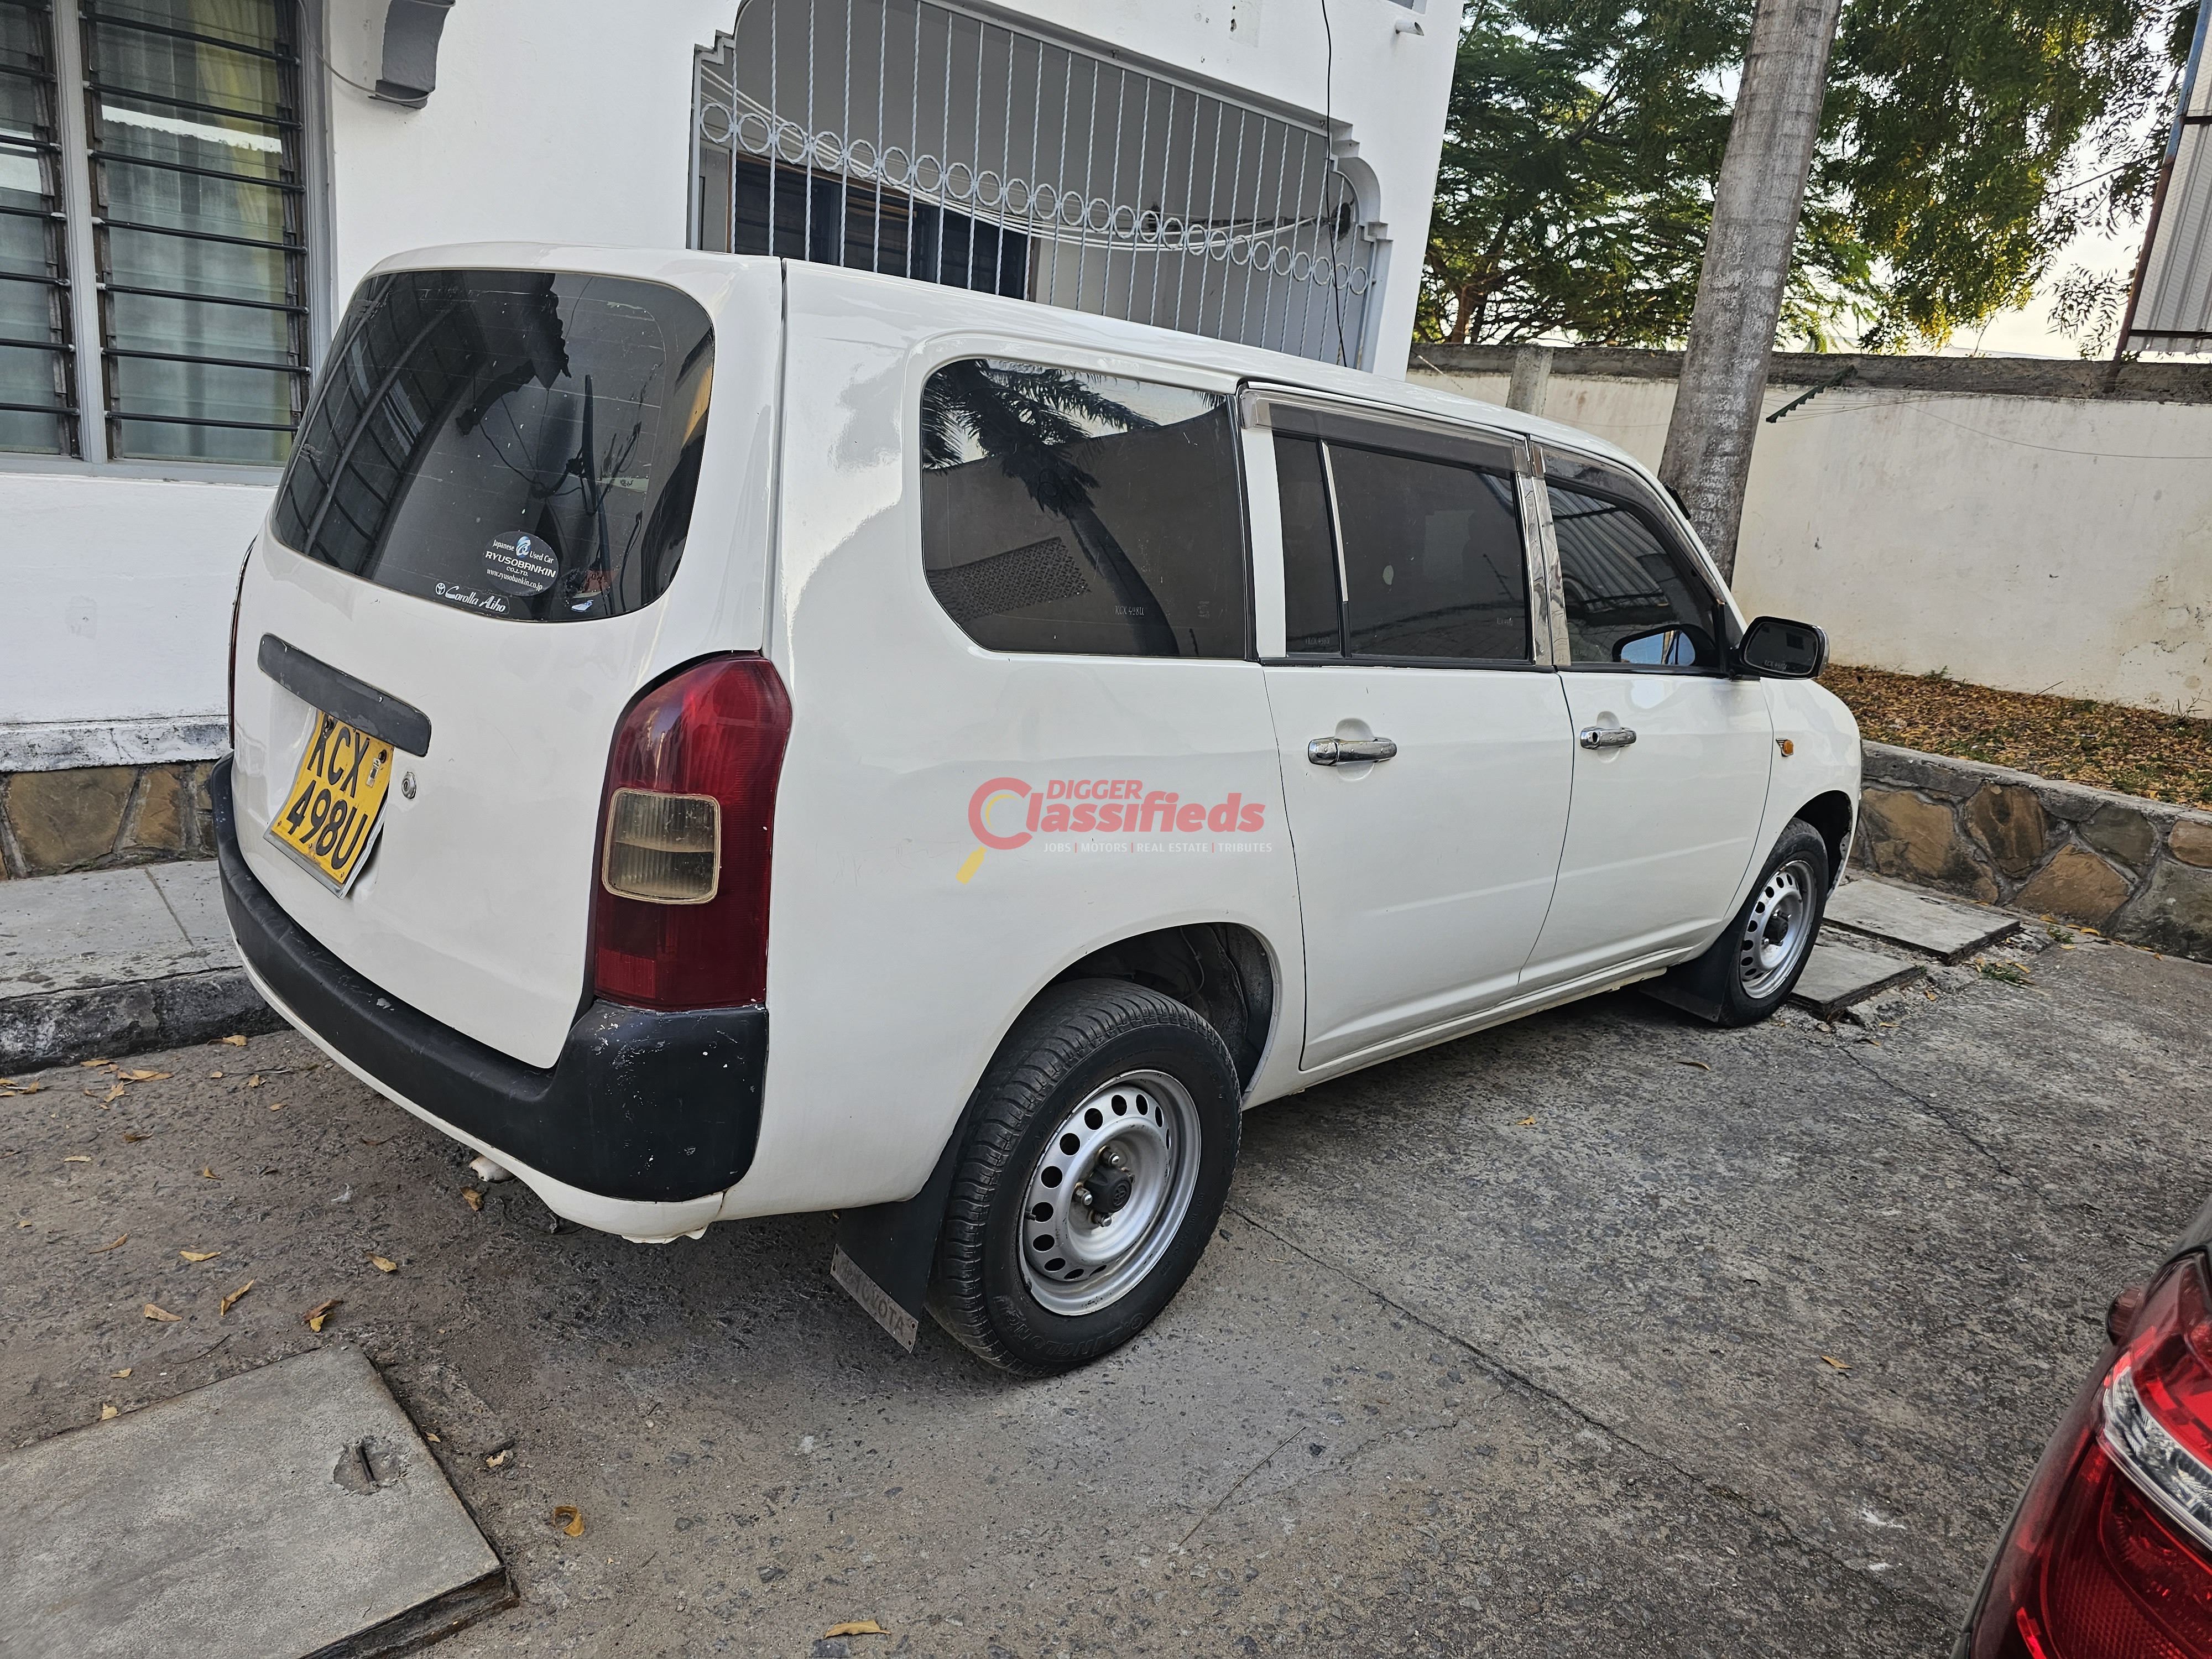 Foreign Used Toyota Probox 2012 In Kampala. See Car Prices, Images